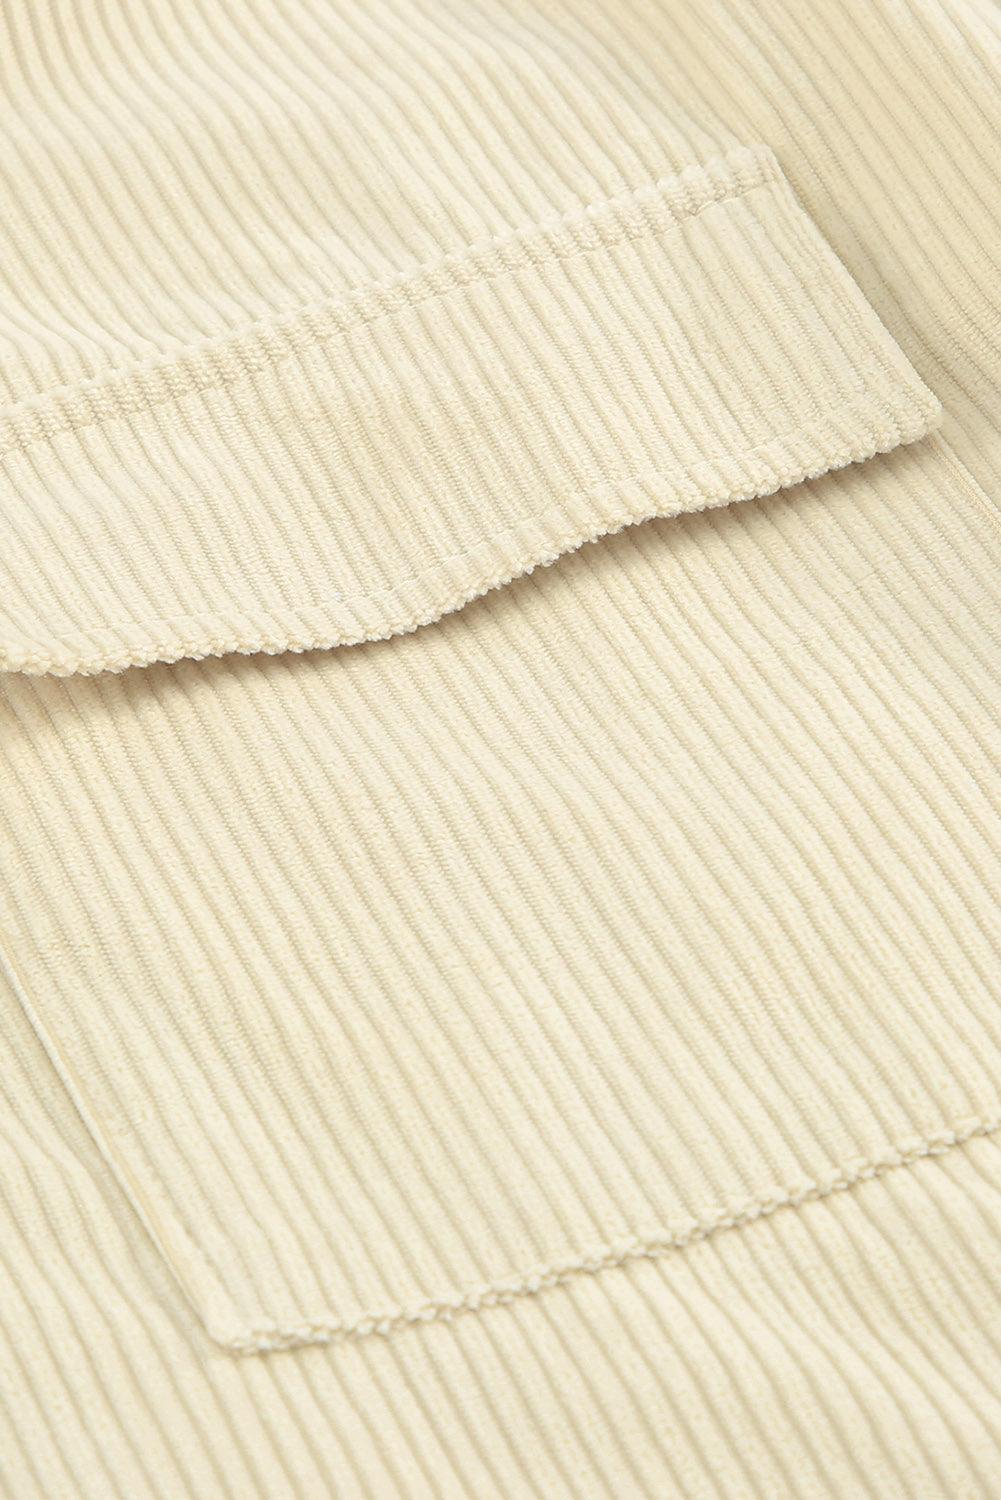 Blank Apparel - Beige Pocketed Button Ribbed Textured Shacket